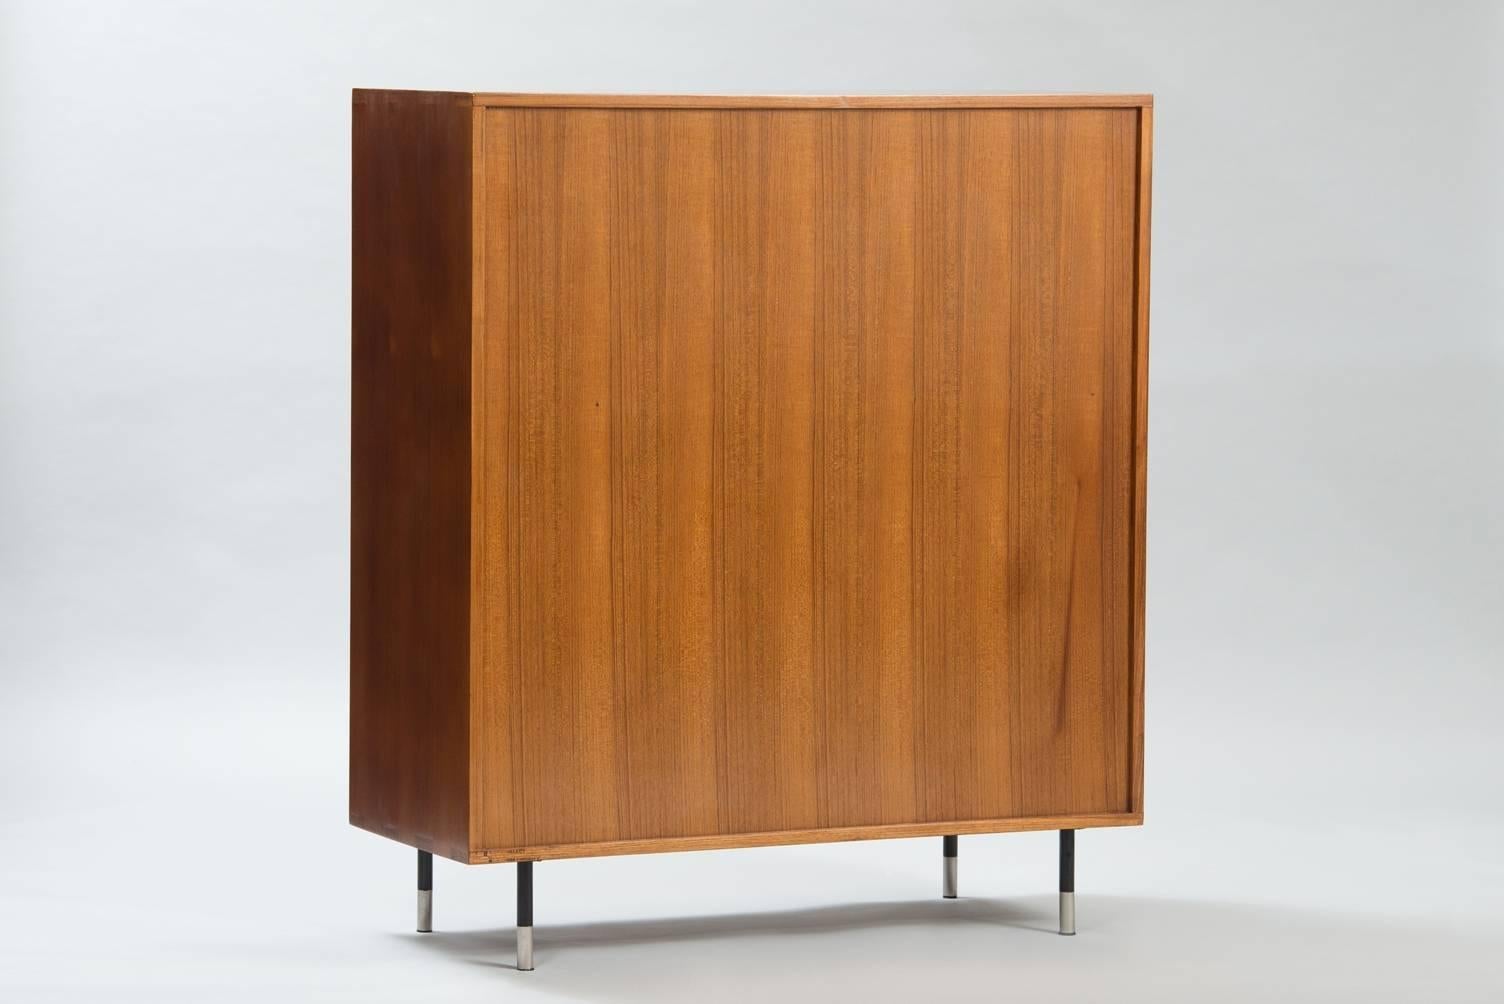 Teak display cabinet, legs and drawers handles in chromed metal and black lacquered wood.